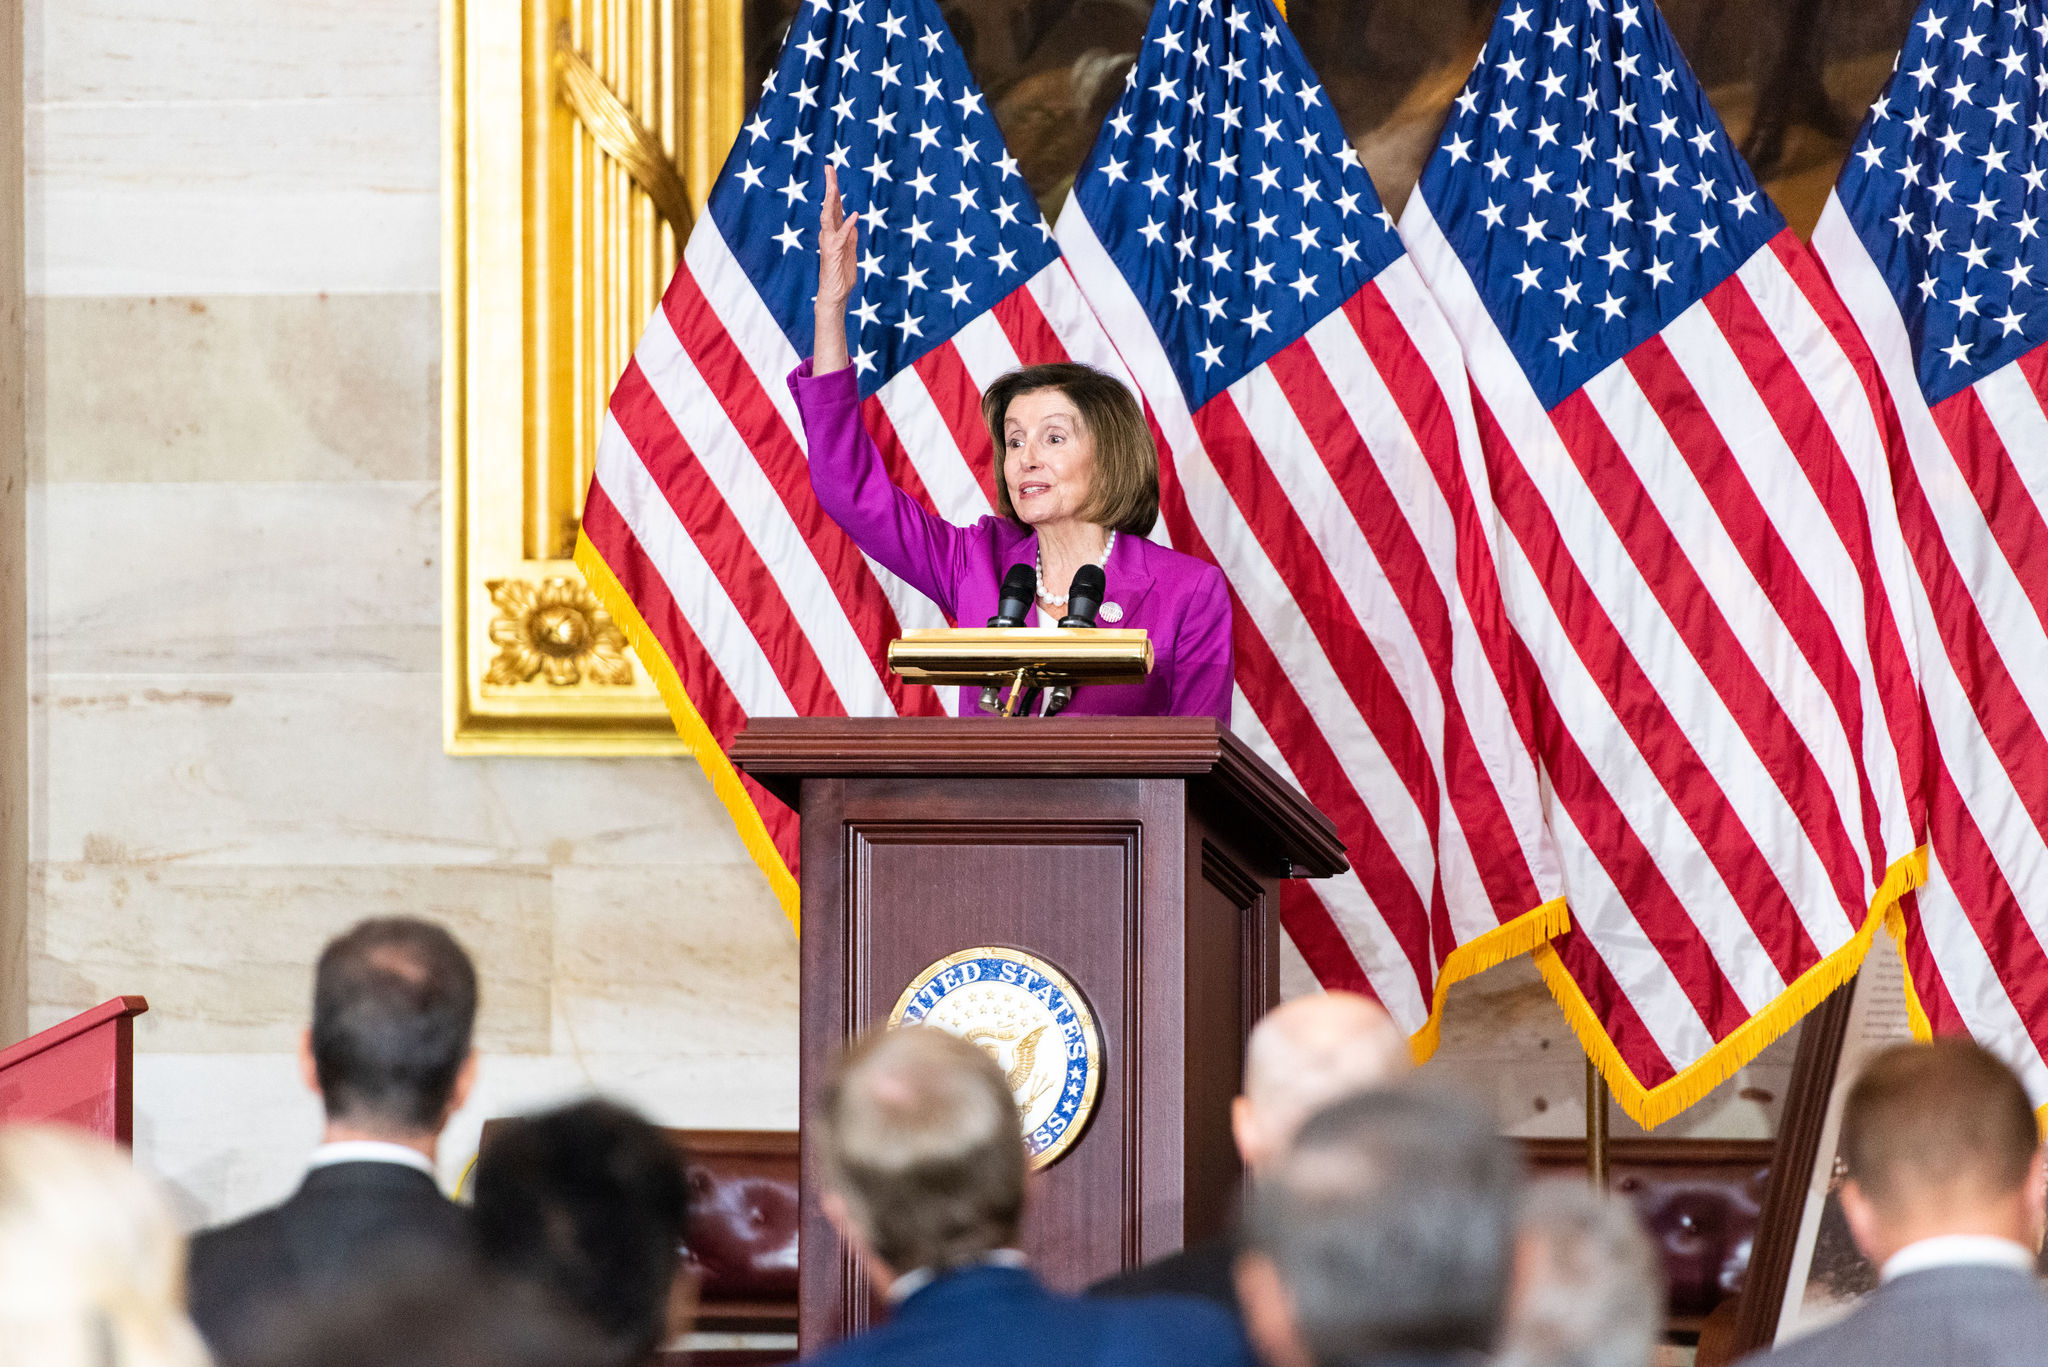 Honorable Nancy Pelosi presided over the unveiling and dedication of the Truman Statue in the U.S. Capitol Rotunda